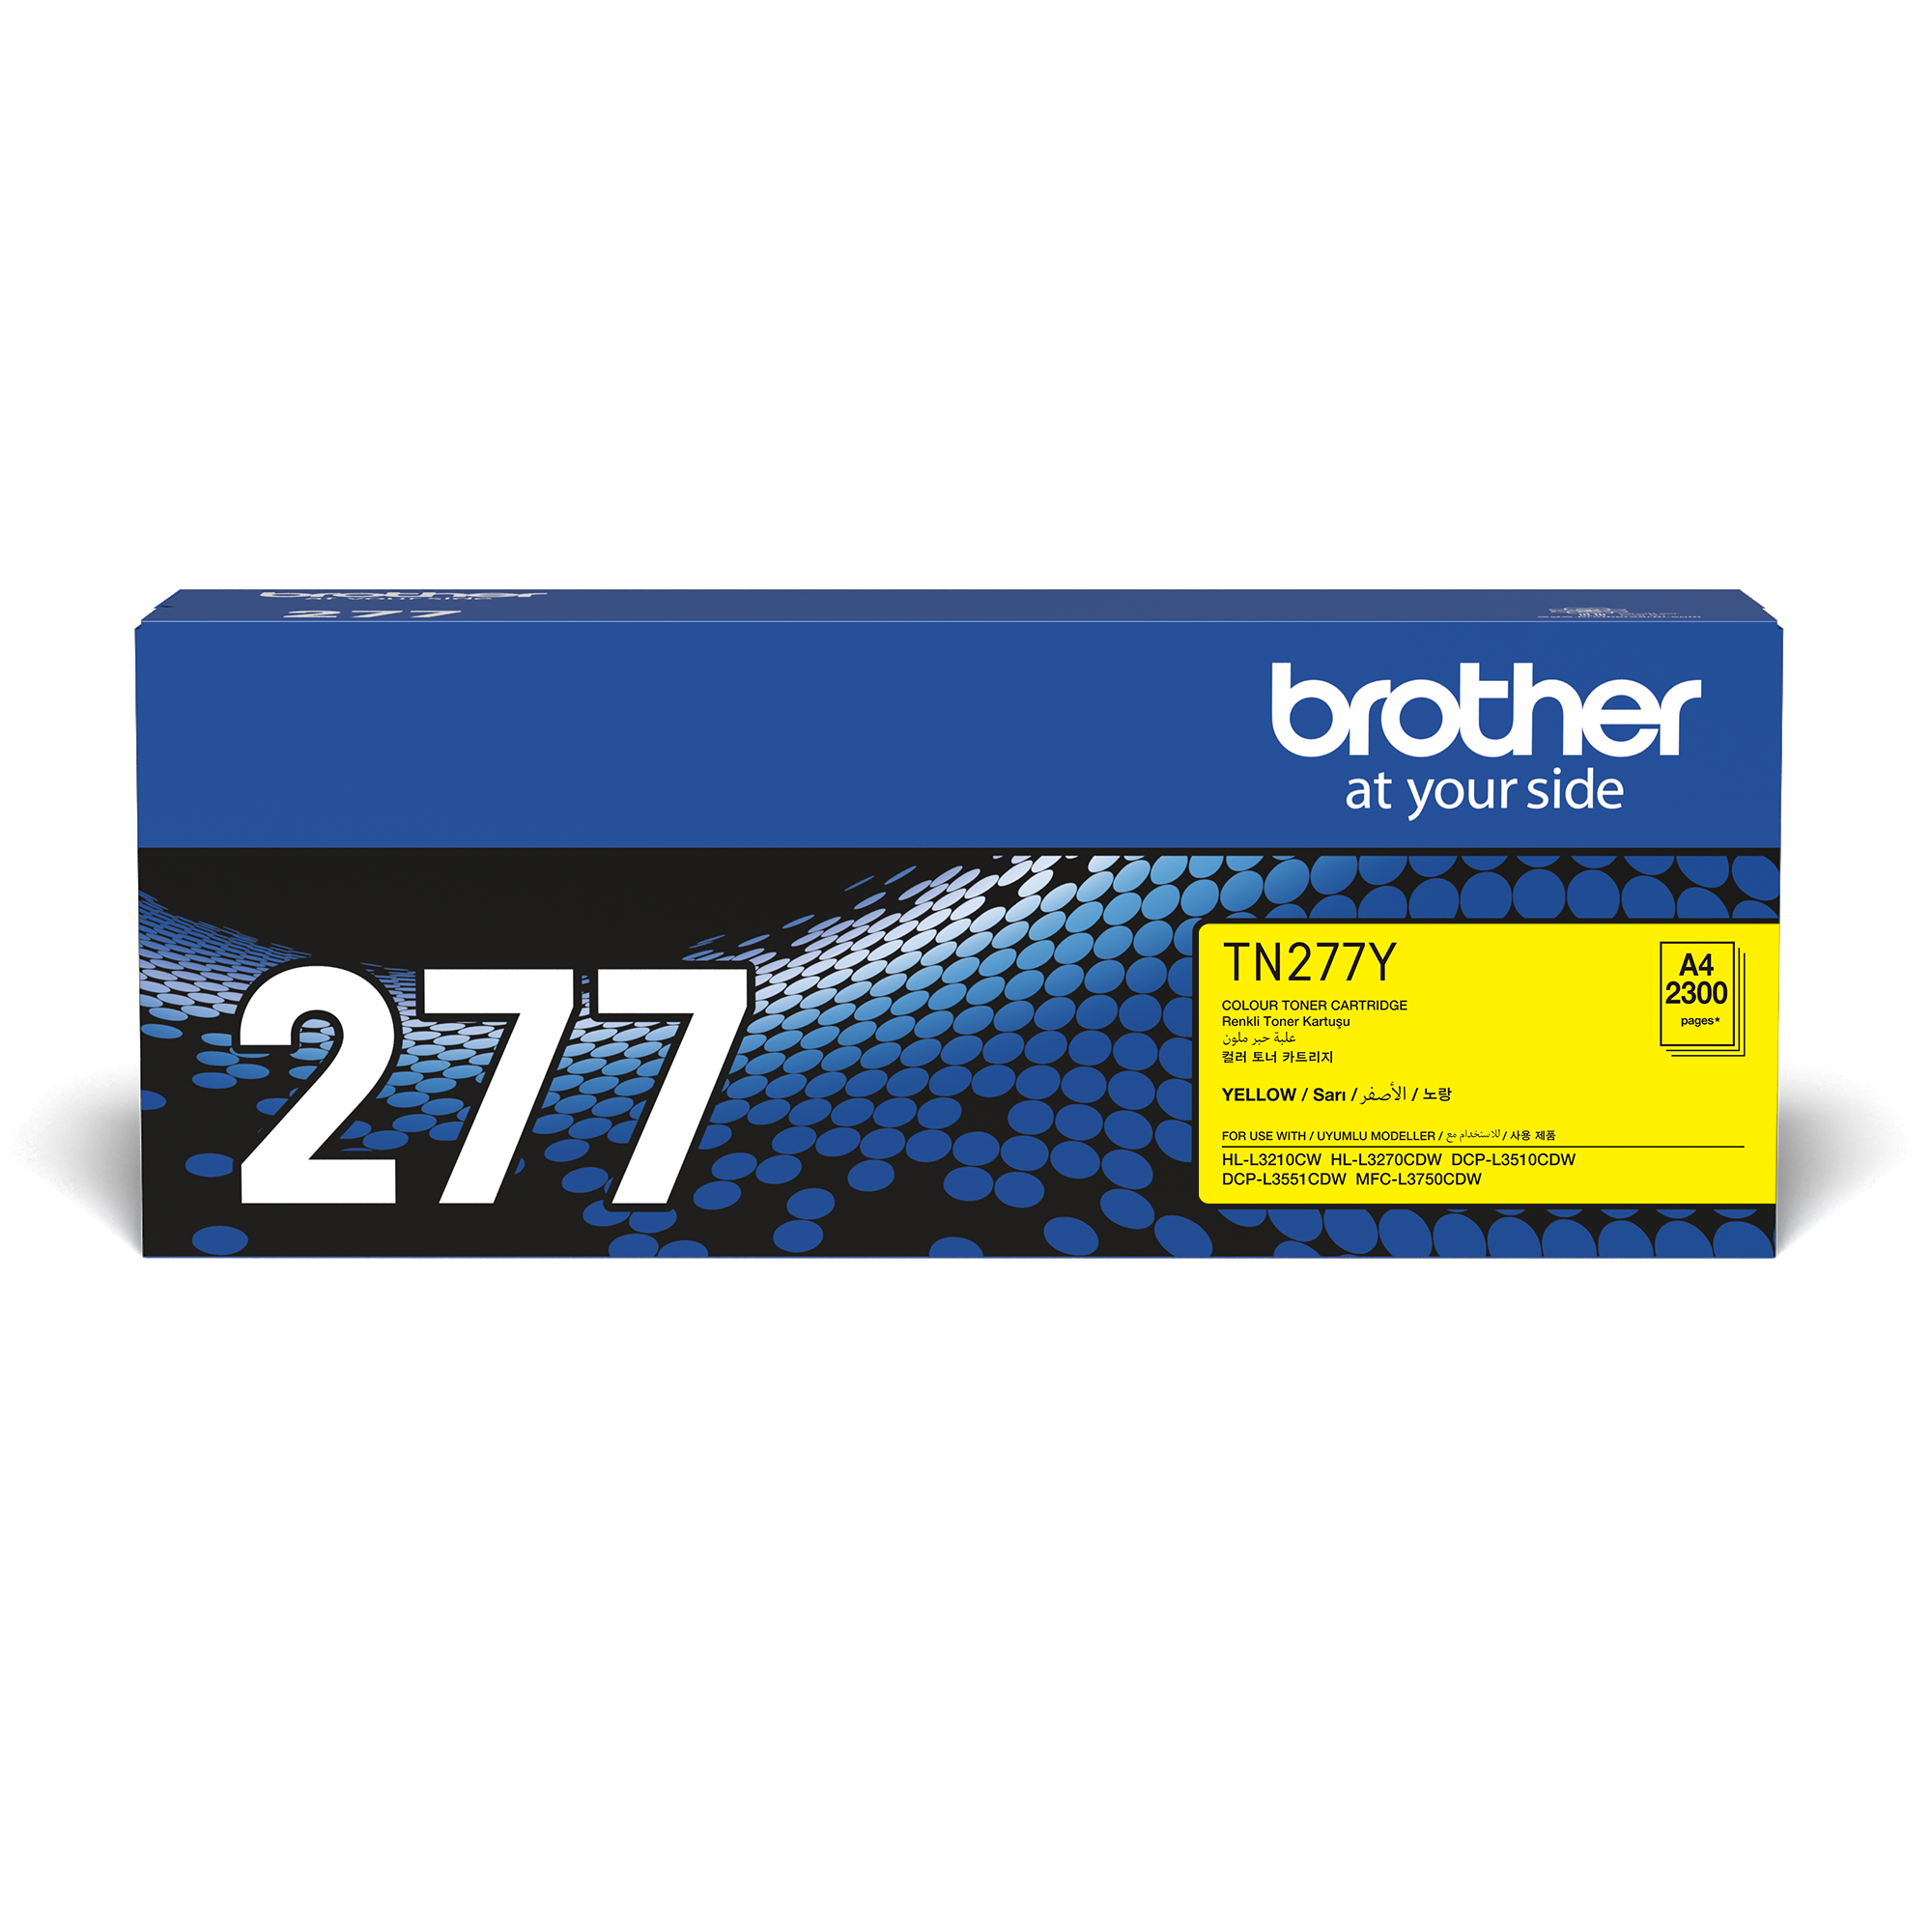 Brother TN277Y TN277Y Yellow Toner Cartridge (2,300 Pages)